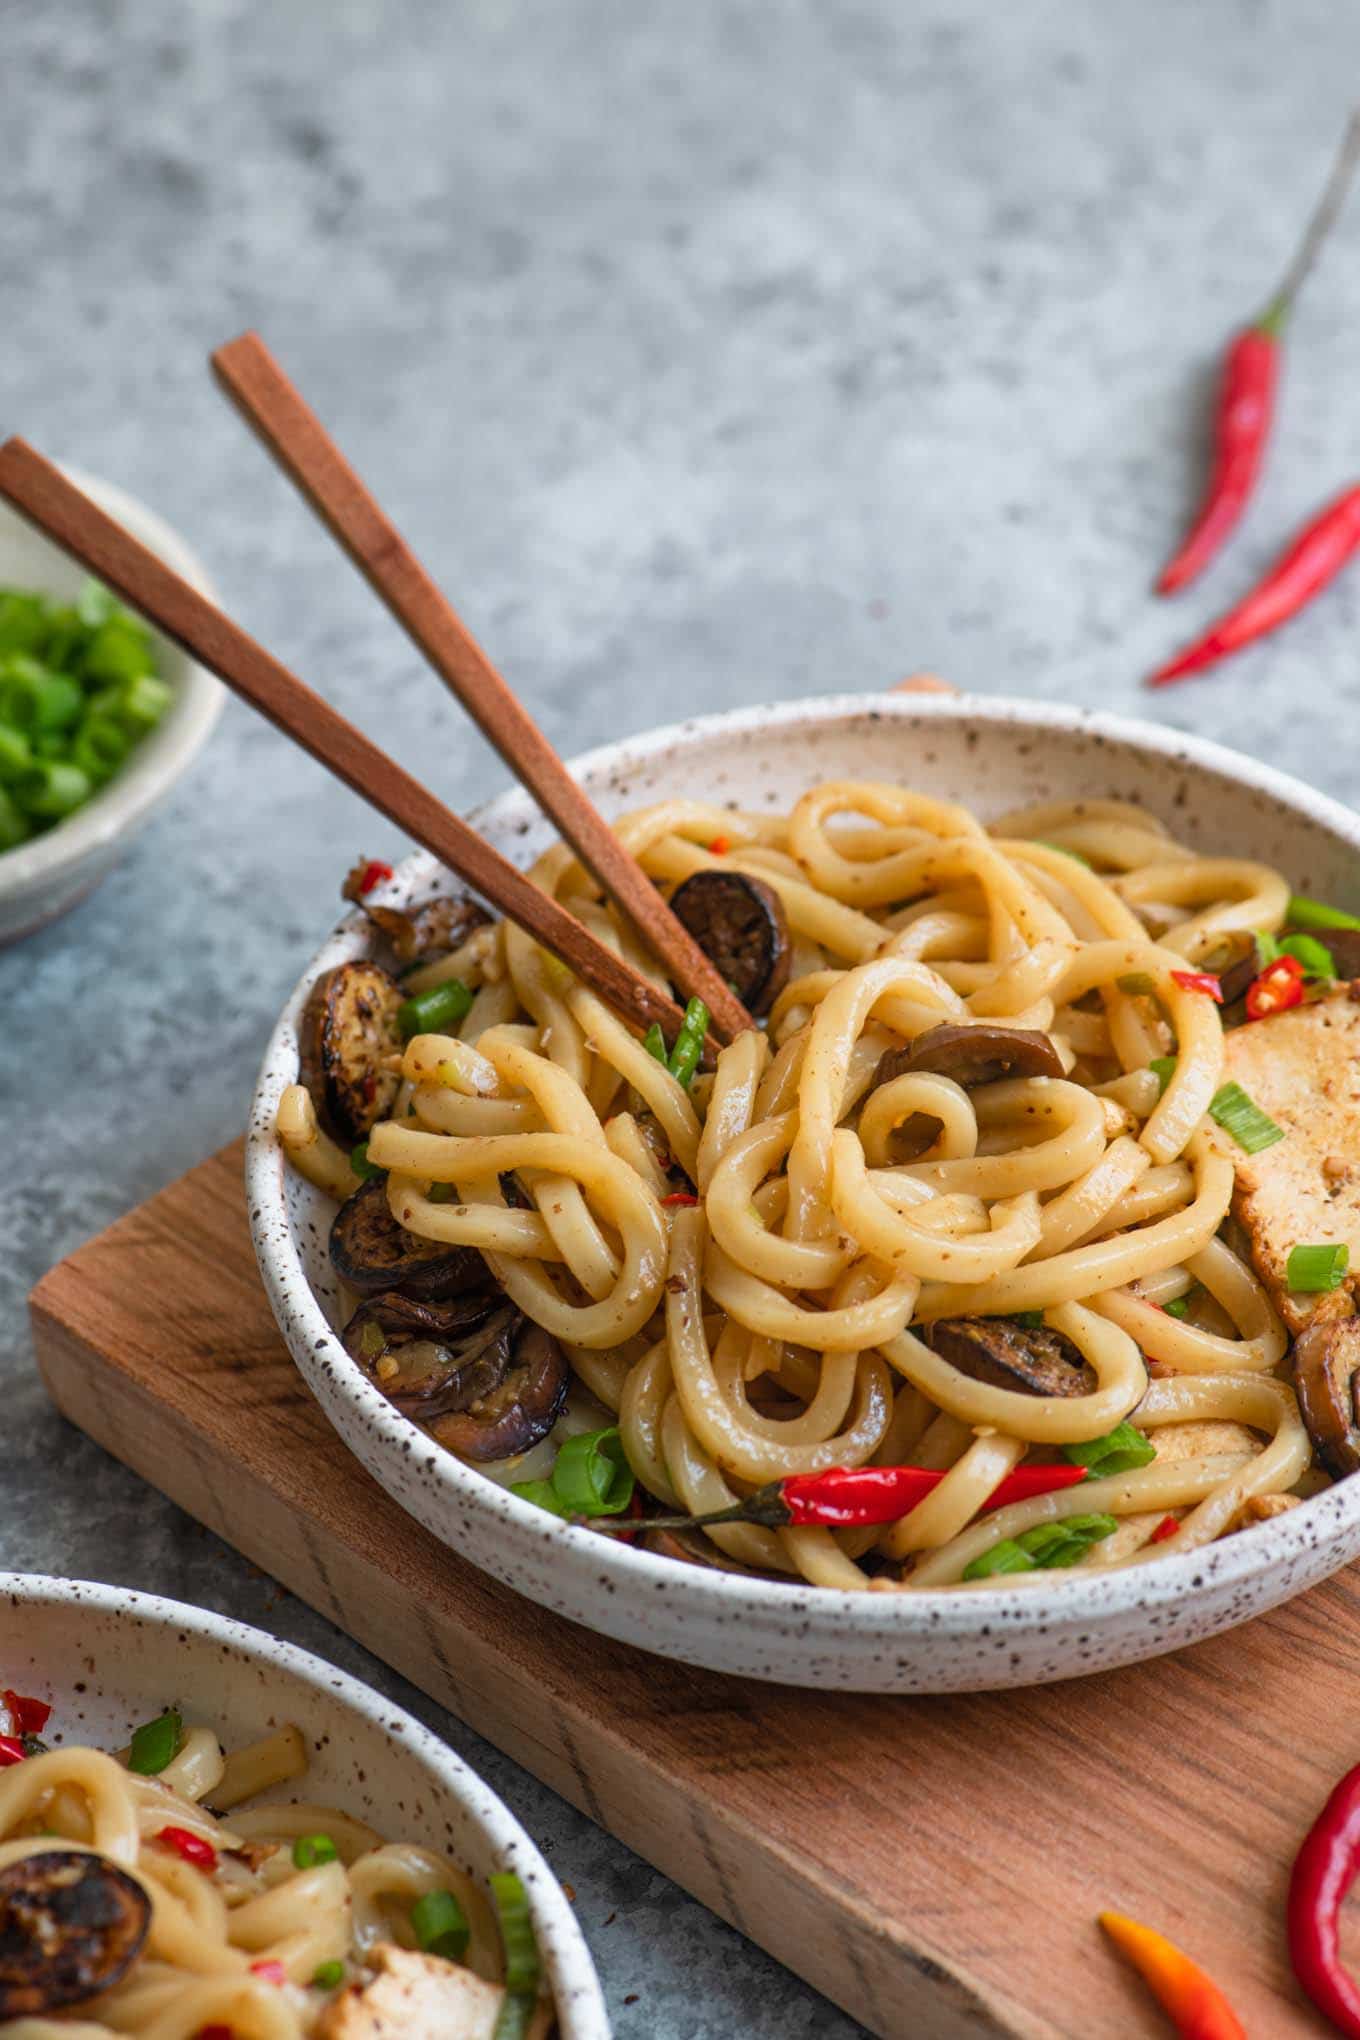 spicy sichuan noodles with eggplant in a bowl with wooden chopsticks